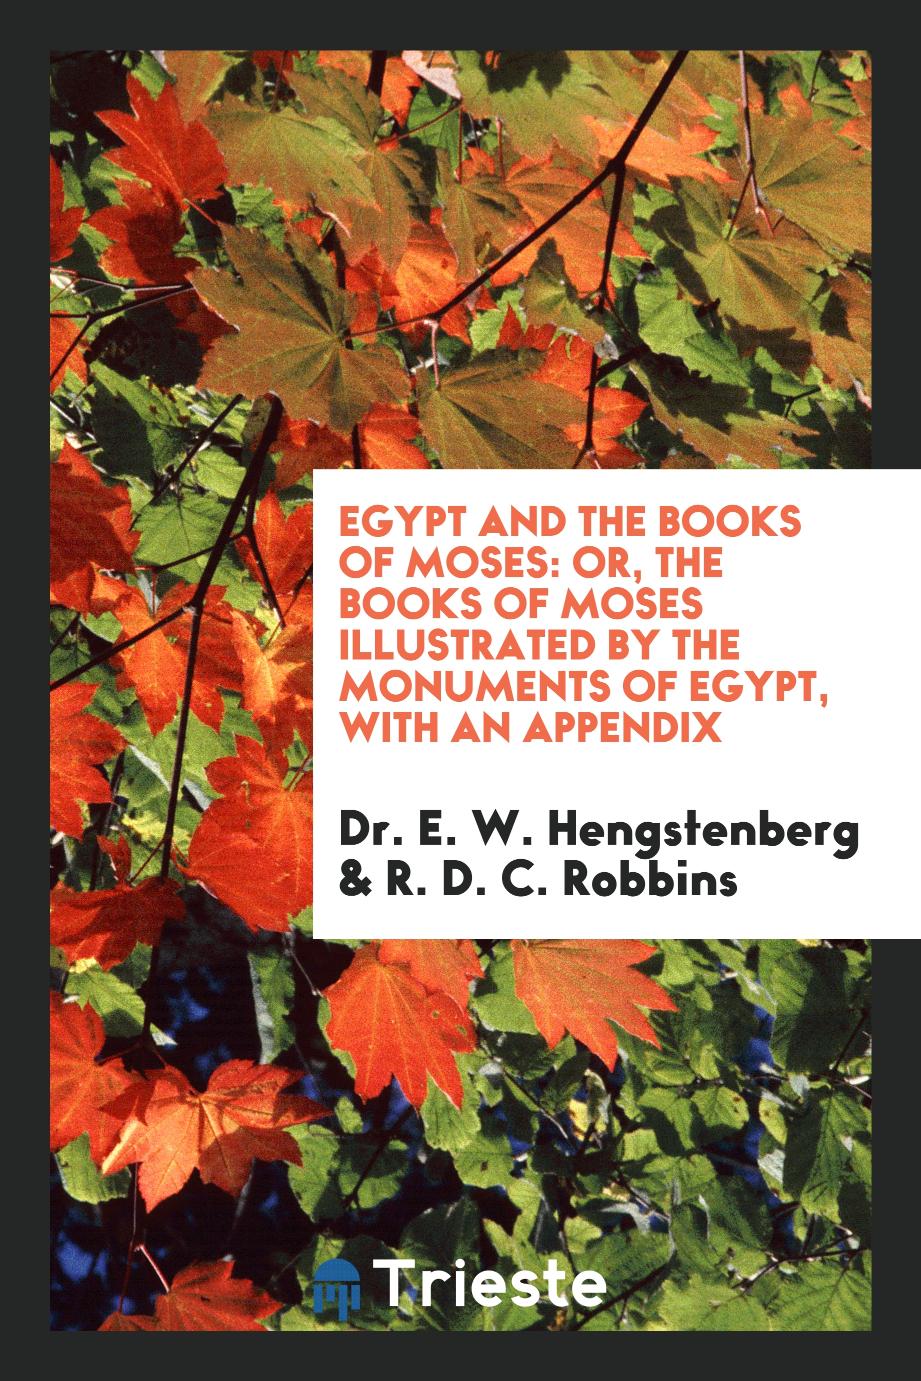 Dr. E. W. Hengstenberg, R. D. C. Robbins - Egypt and the Books of Moses: Or, The Books of Moses Illustrated by the Monuments of Egypt, with an Appendix